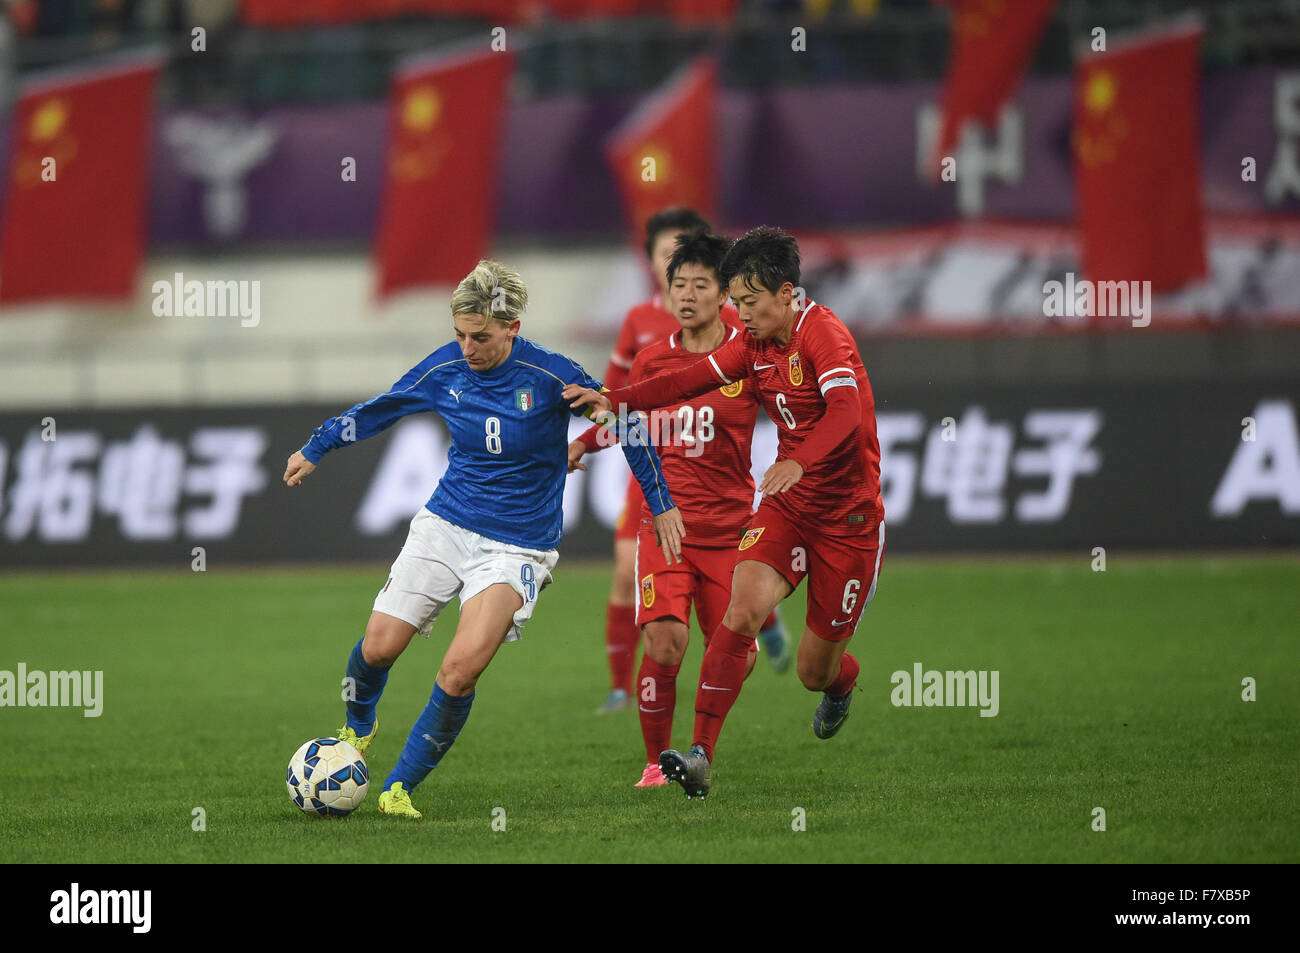 Guiyang, China's Guizhou Province. 3rd Dec, 2015. Italy's Gabbiadini Melania (1st, L) vies with China's players during their international friendly women's soccer match in Guiyang, southwest China's Guizhou Province, Dec. 3, 2015. The match ended with a 1-1 tie. © Liu Xu/Xinhua/Alamy Live News Stock Photo